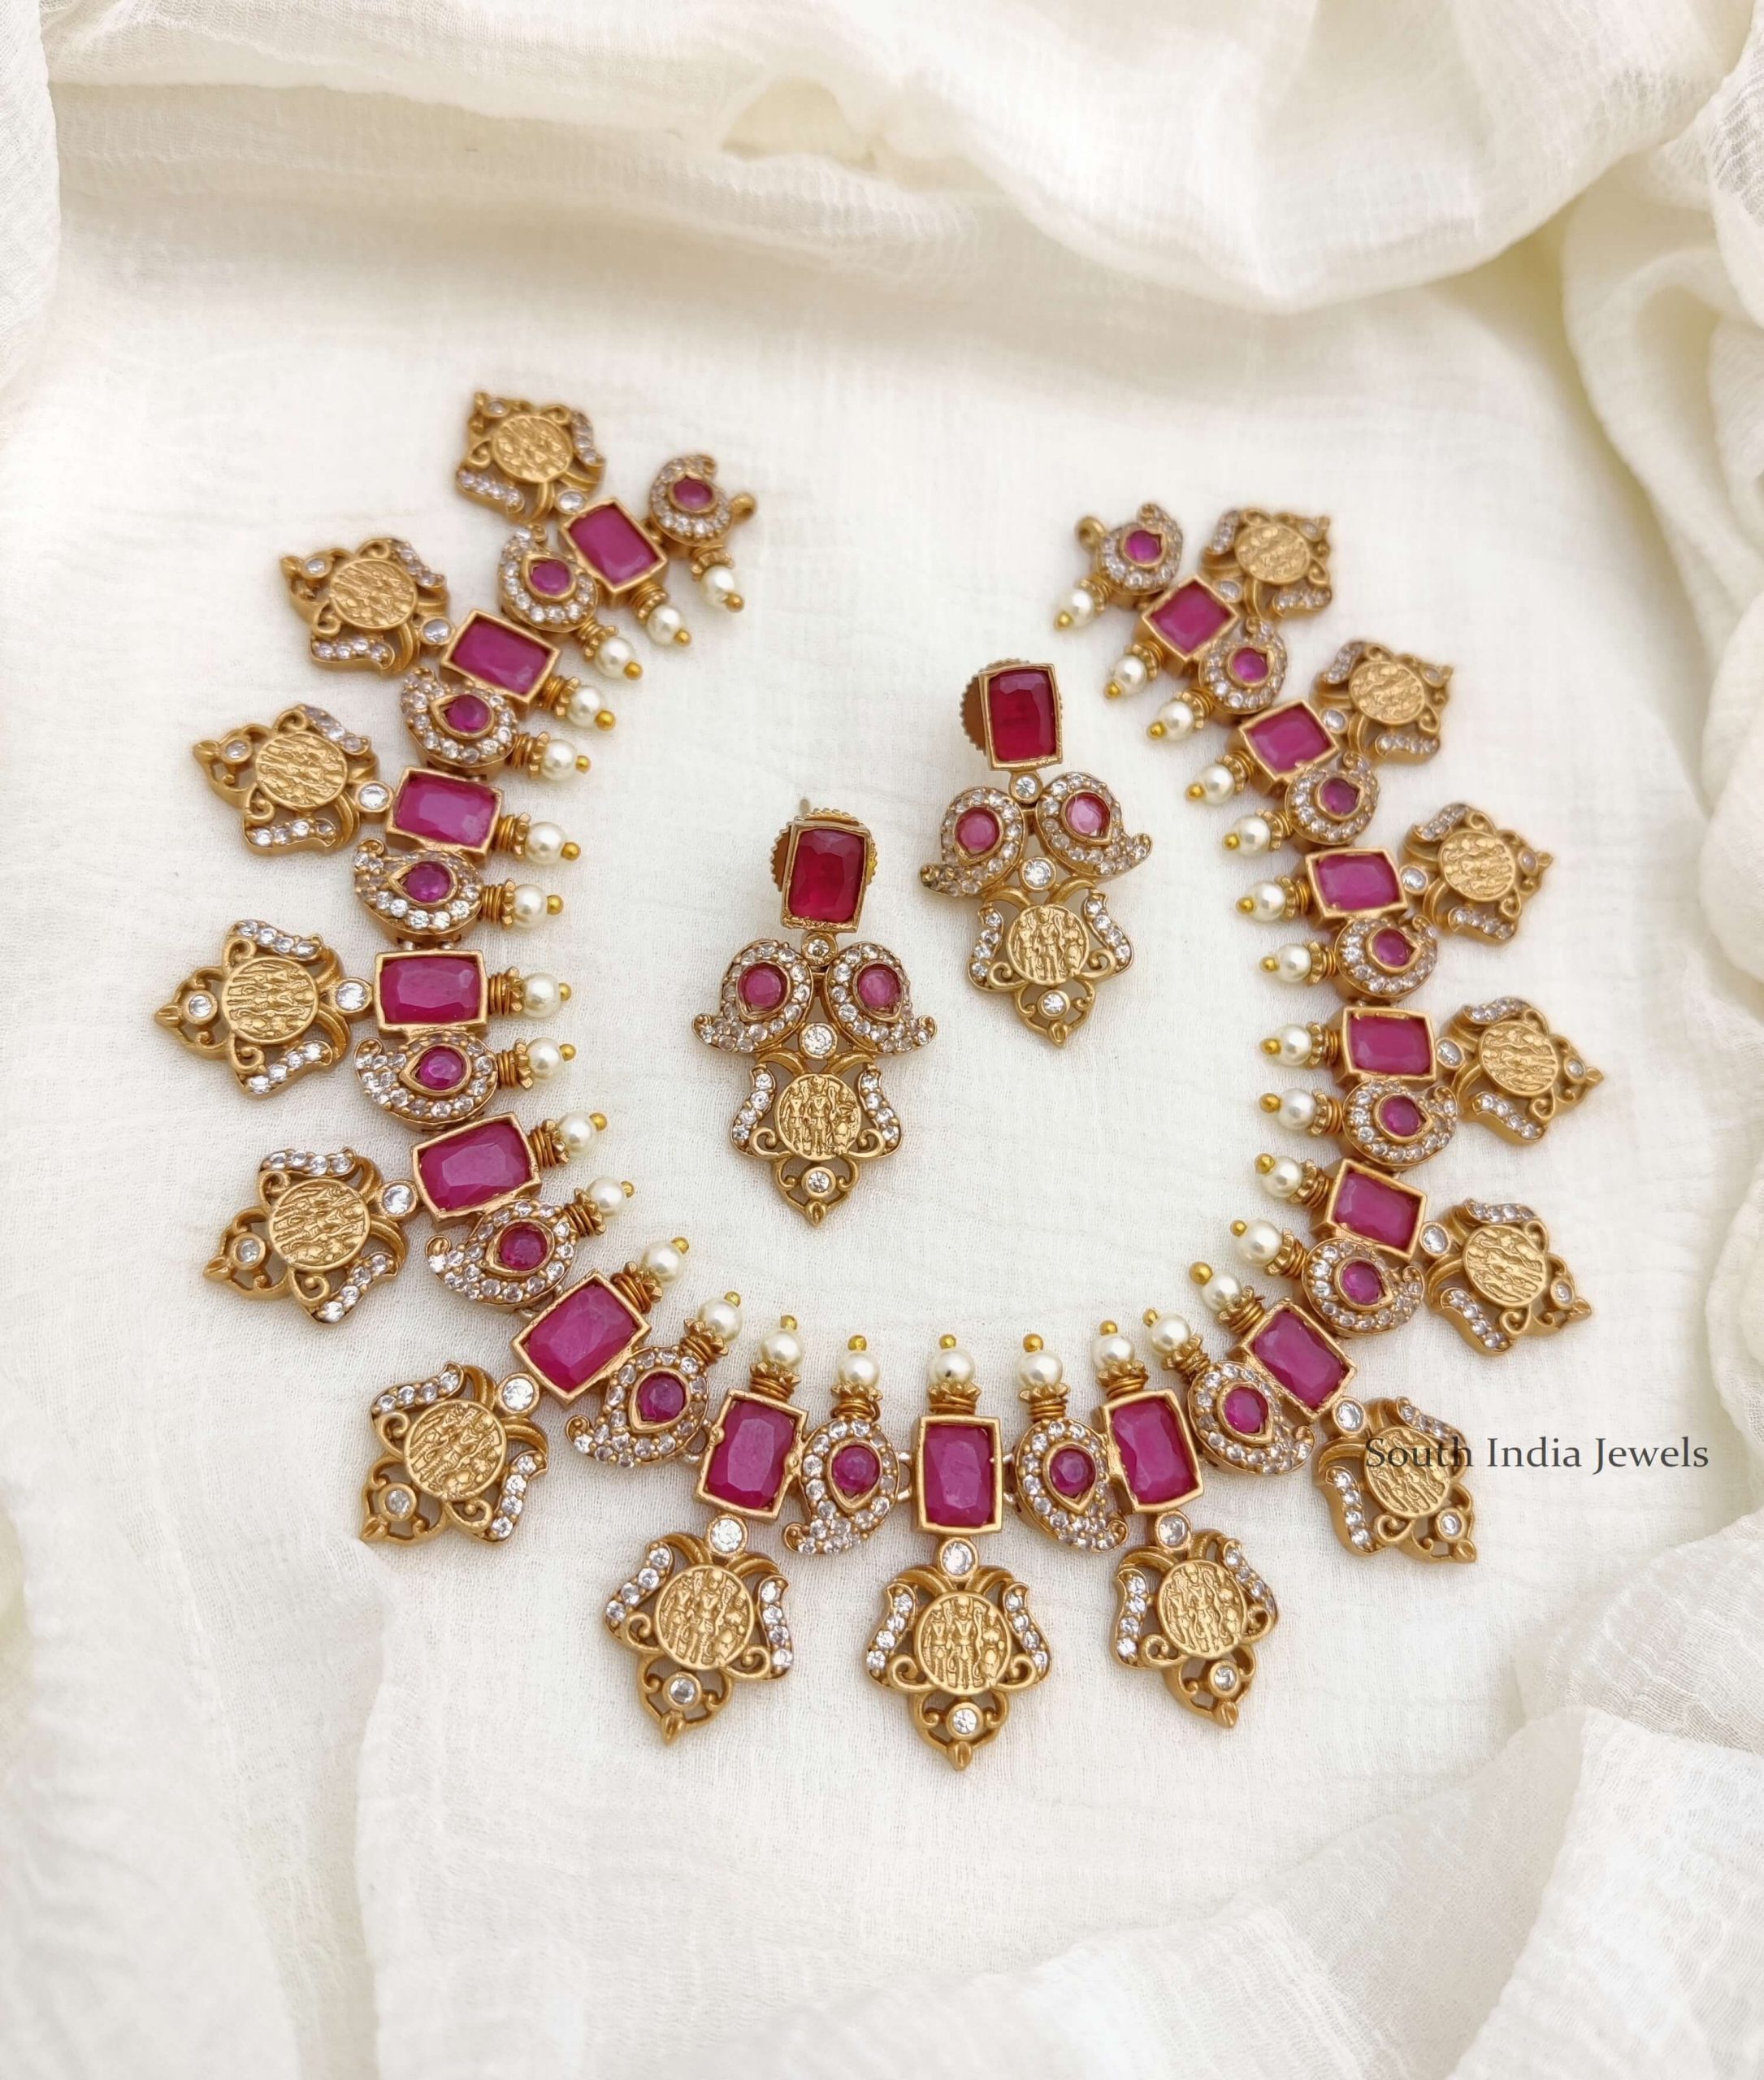 Traditional Ramparivar AD Necklace - South India Jewels